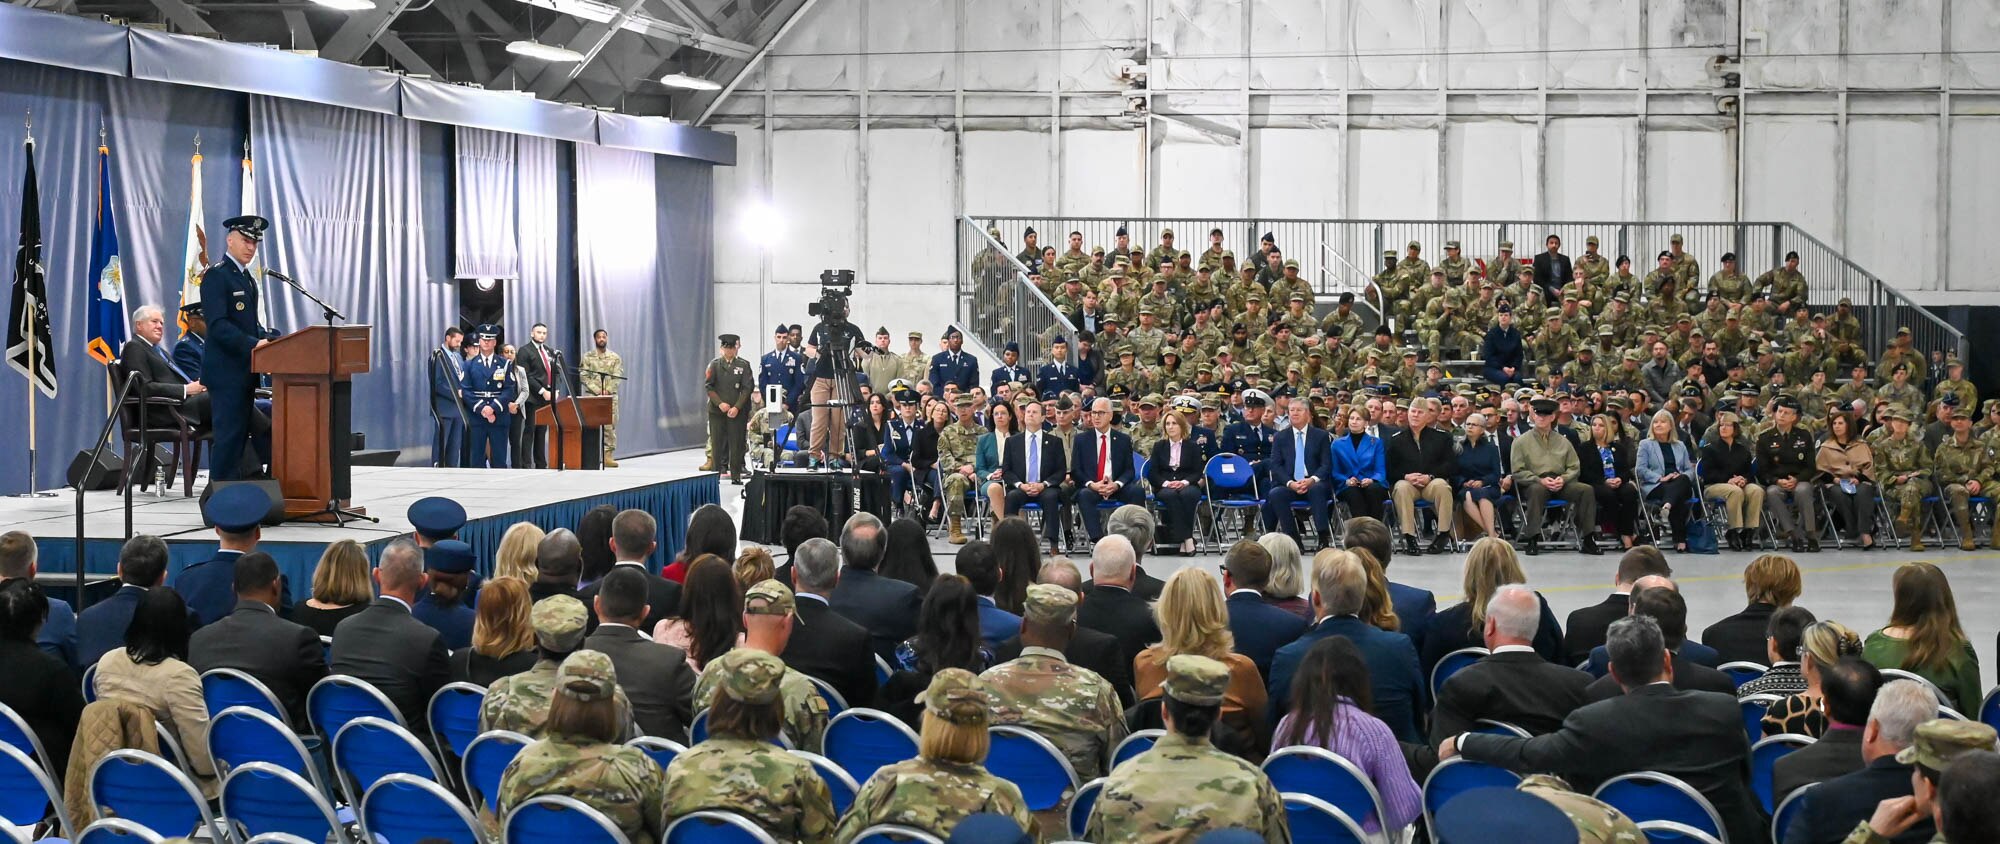 Air Force Chief of Staff Gen. David W. Allvin speaks to the audience during his welcome ceremony at Joint Base Andrews, Md., Nov. 17, 2023. Allvin was officially sworn in as the 23rd Air Force chief of staff on Nov. 2 at the U.S. Air Force Academy in Colorado Springs, Colo. (U.S. Air Force photo by SSgt. Stuart Bright)